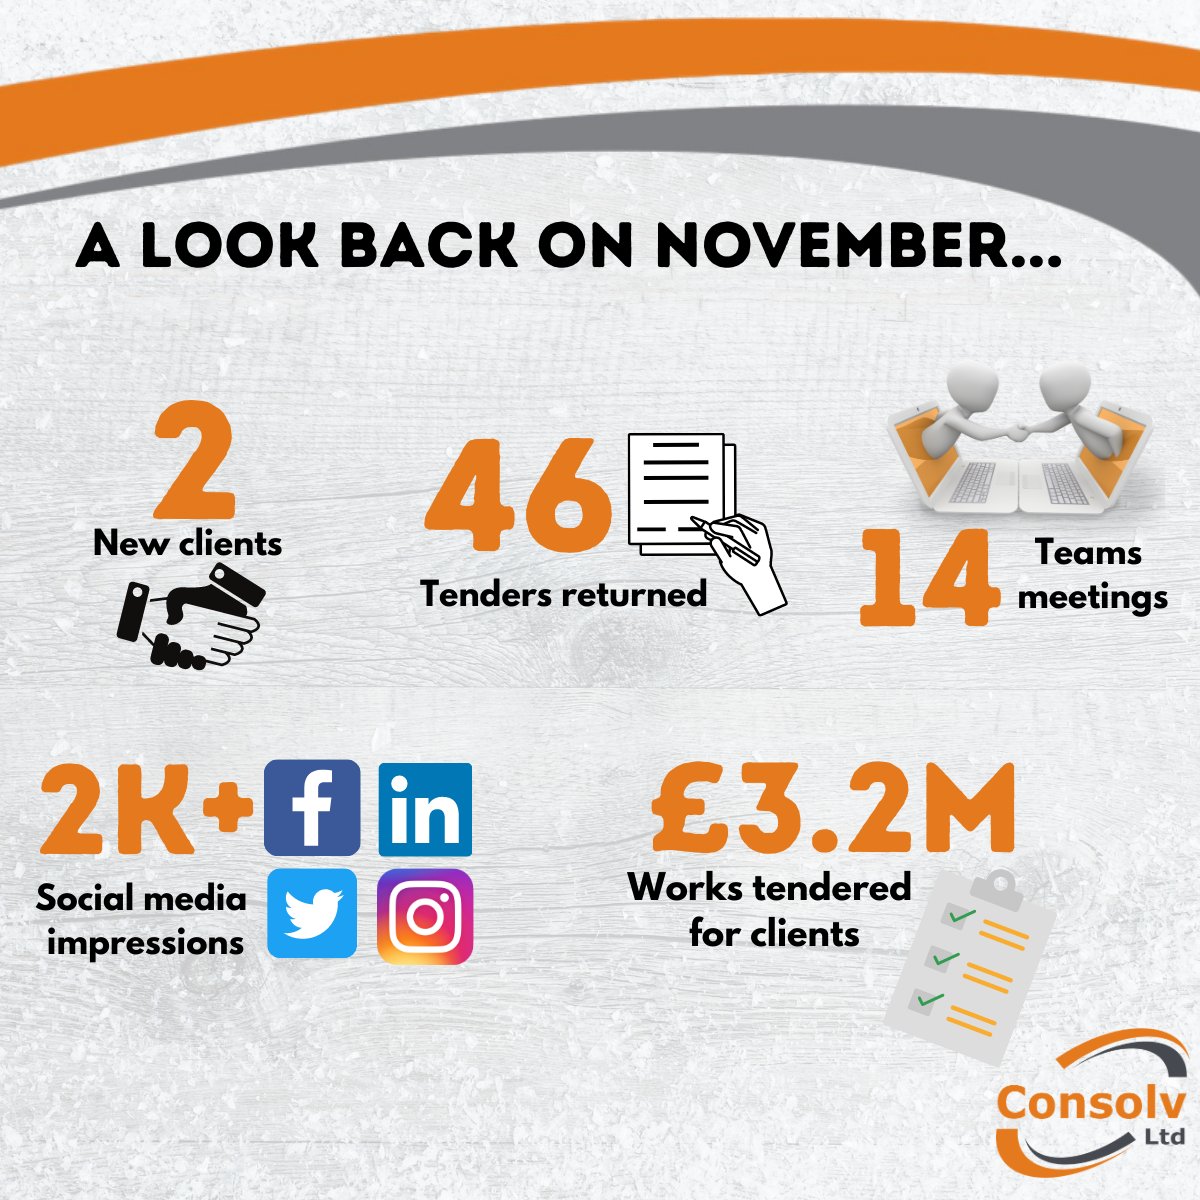 It has been another very busy month here at Consolv.

Here is a little look back on some of our highlights from November!

#quantitysurveying #construction #contractreview #disputeresolution #november2020 #contractors #review #newclient